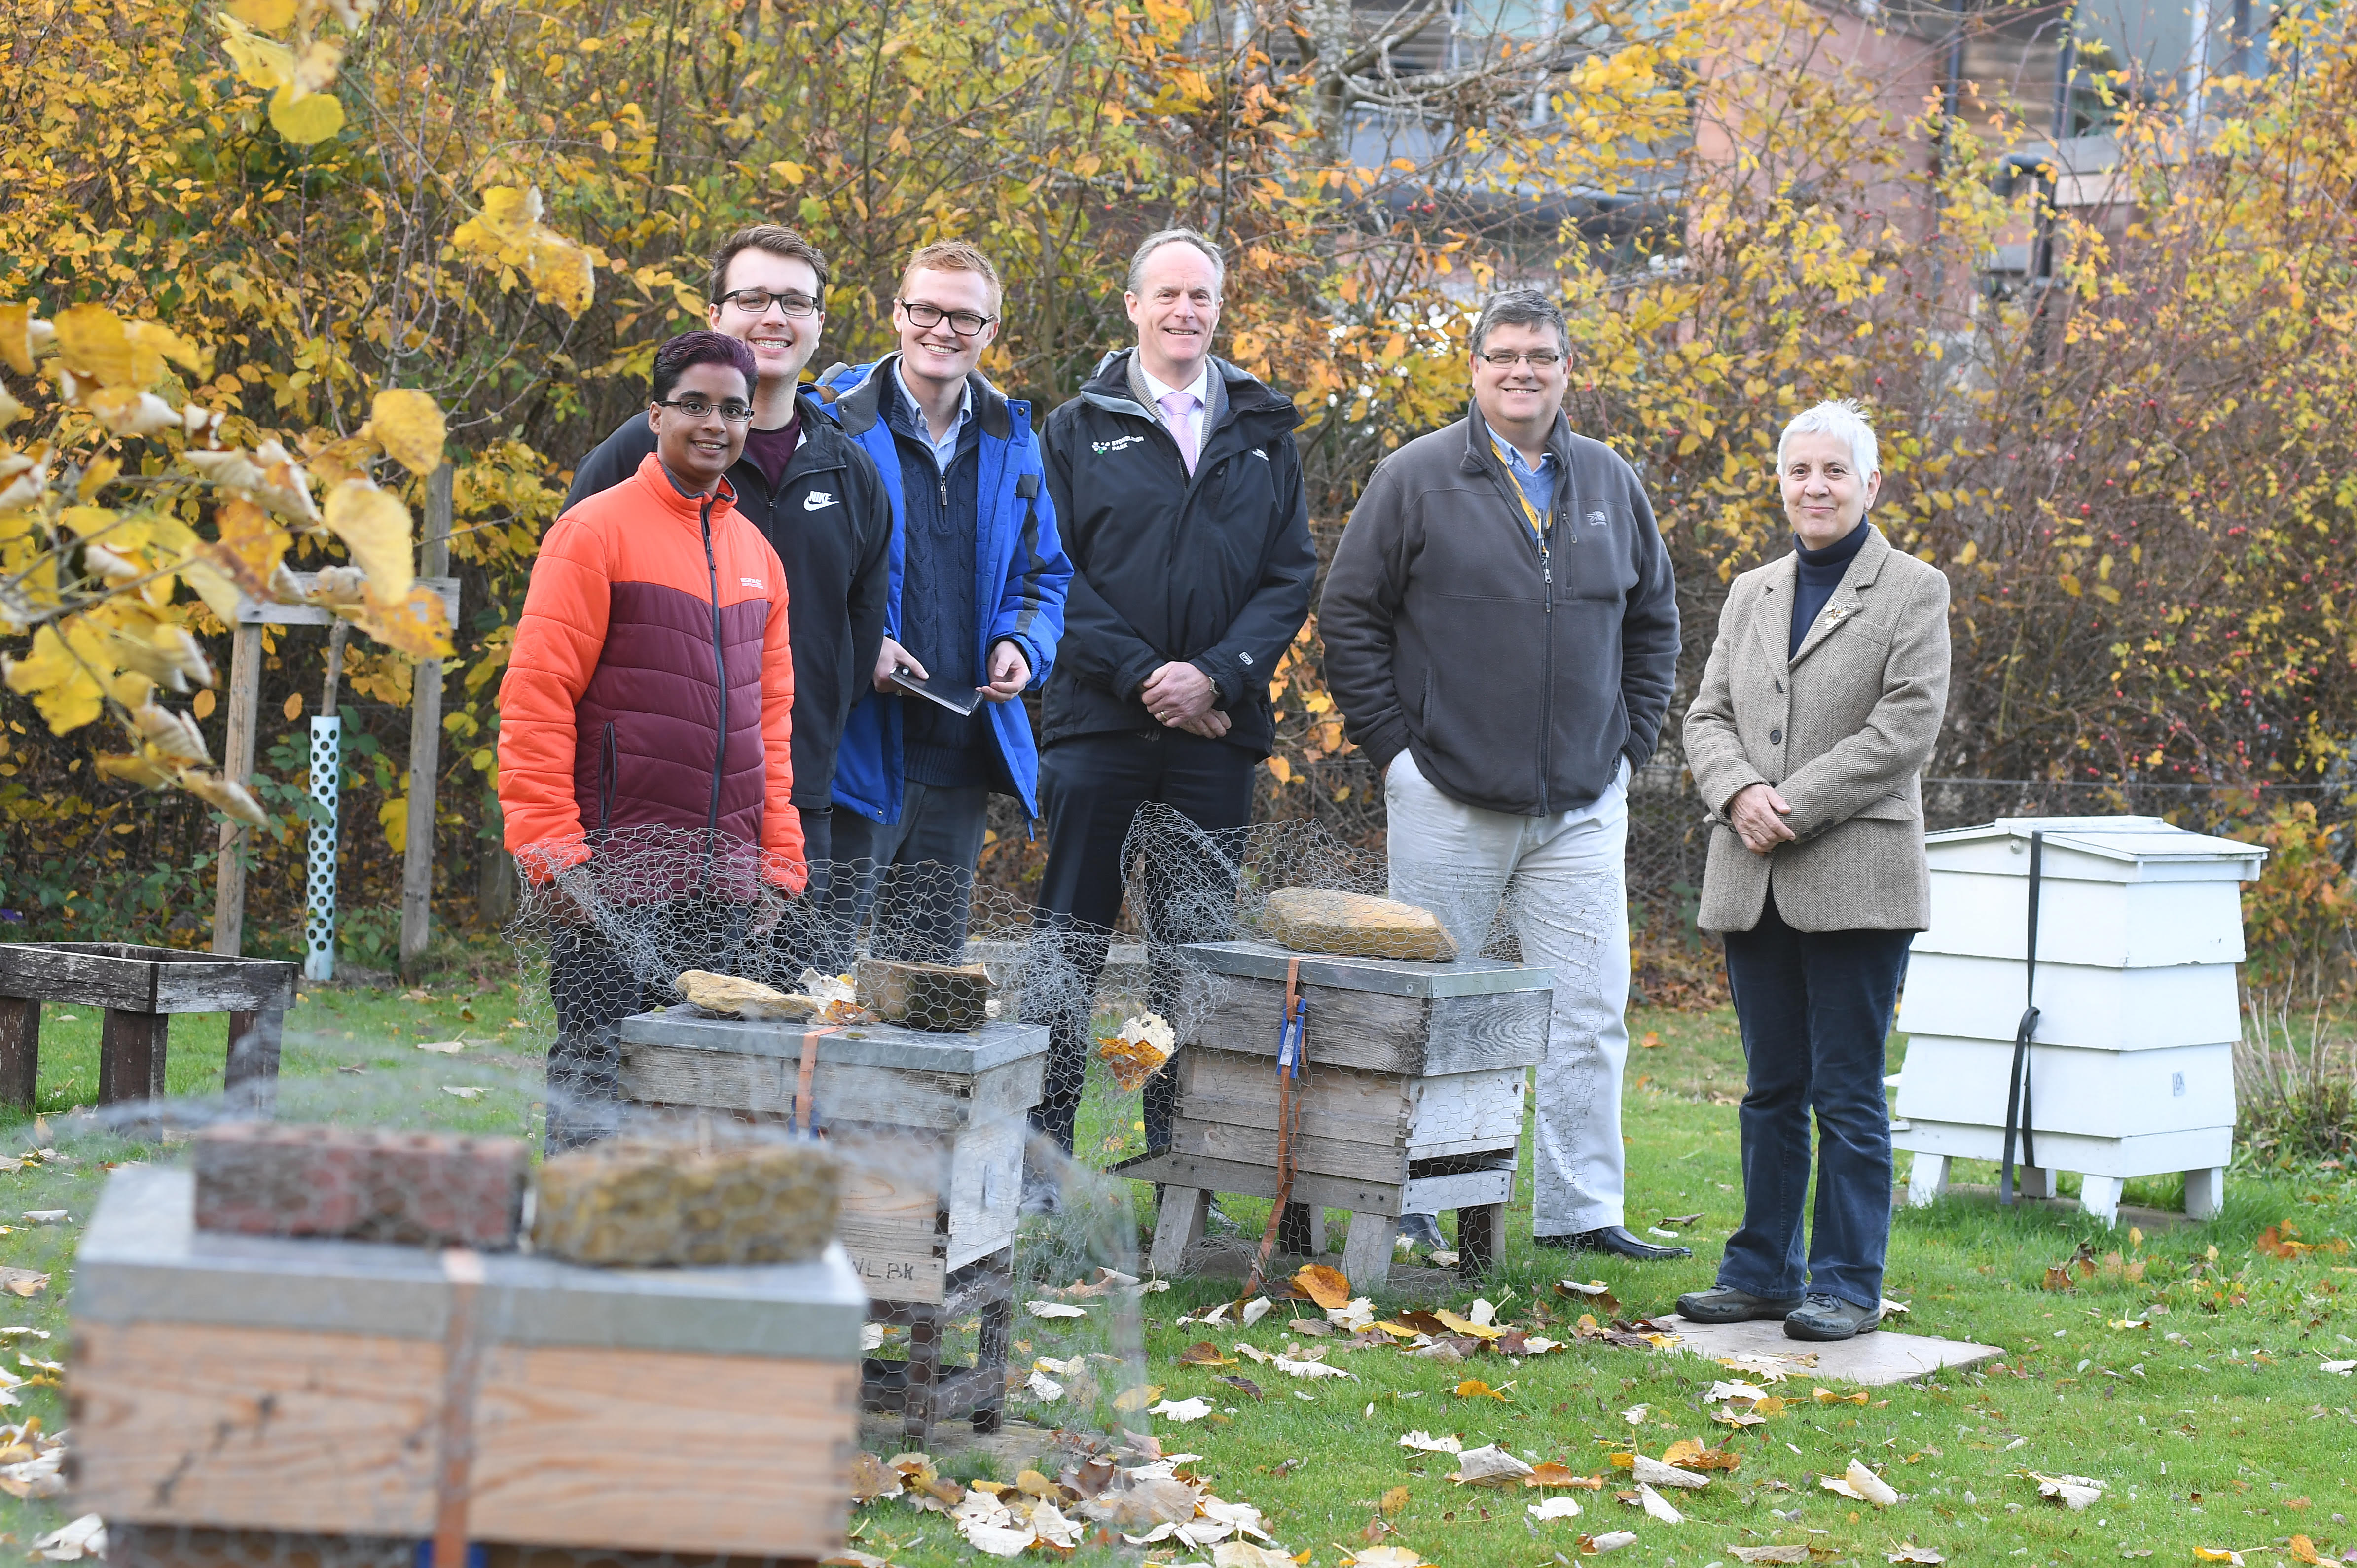 Horticulture students to help inspire next generation of beekeepers